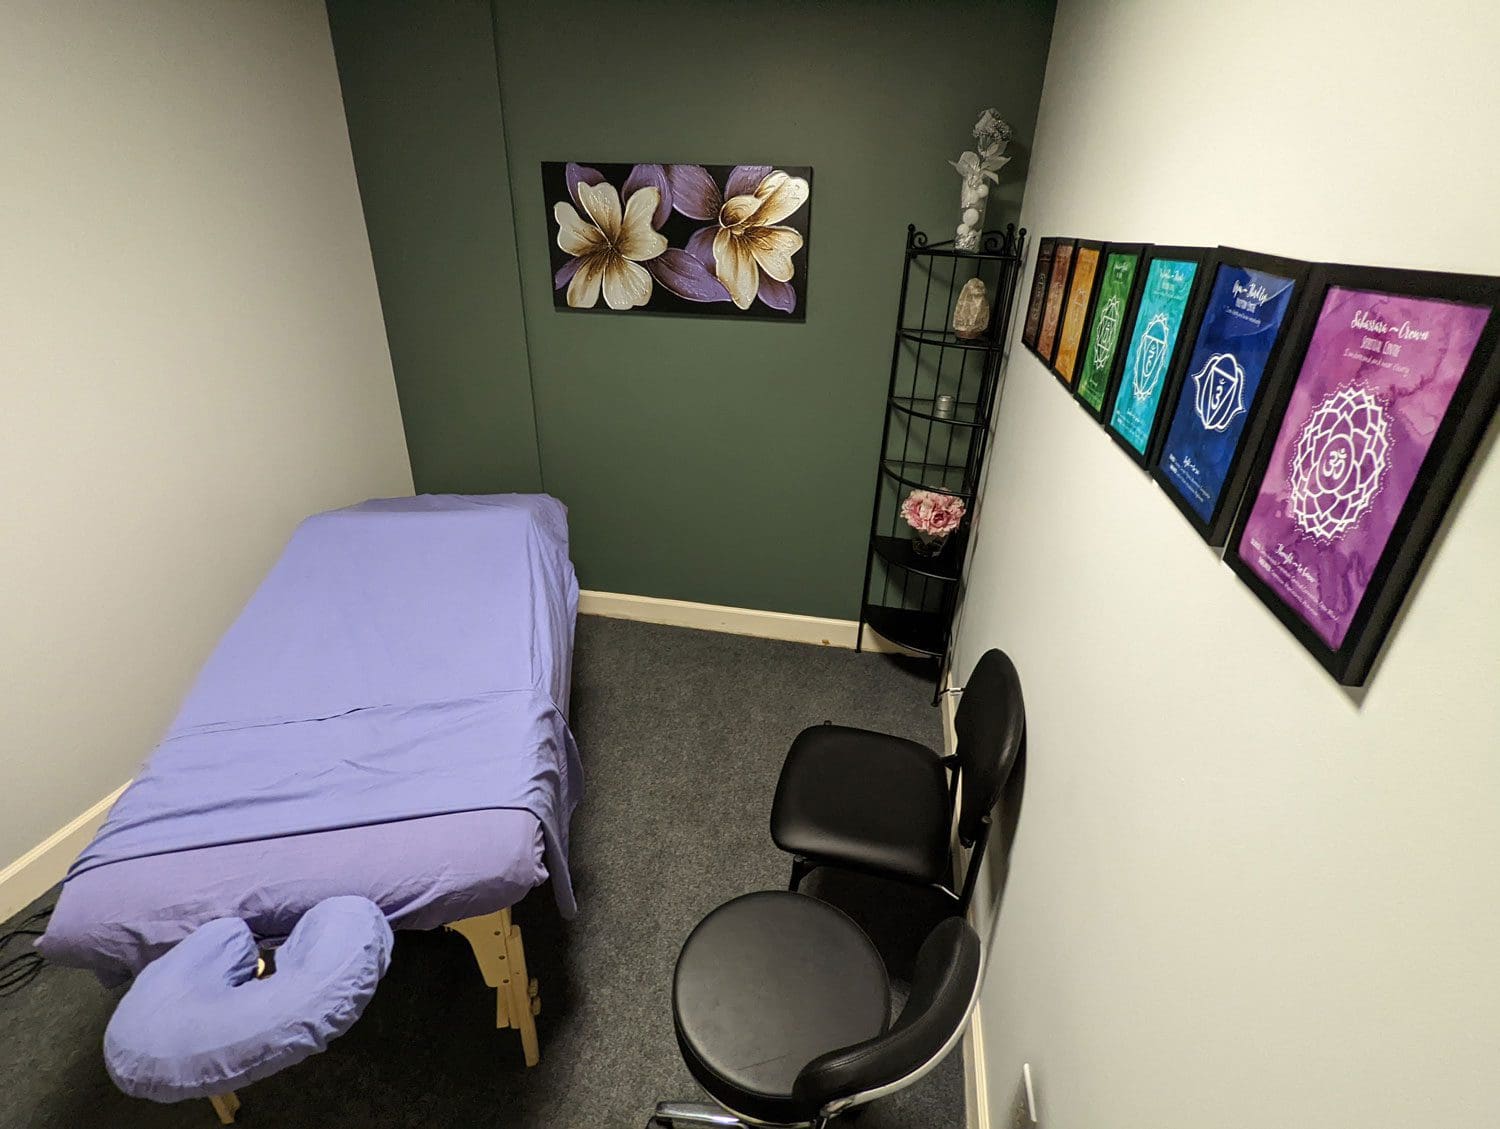 Northeast Portland Chiropractic clinic's massage therapy room with green walls and floral wall art.